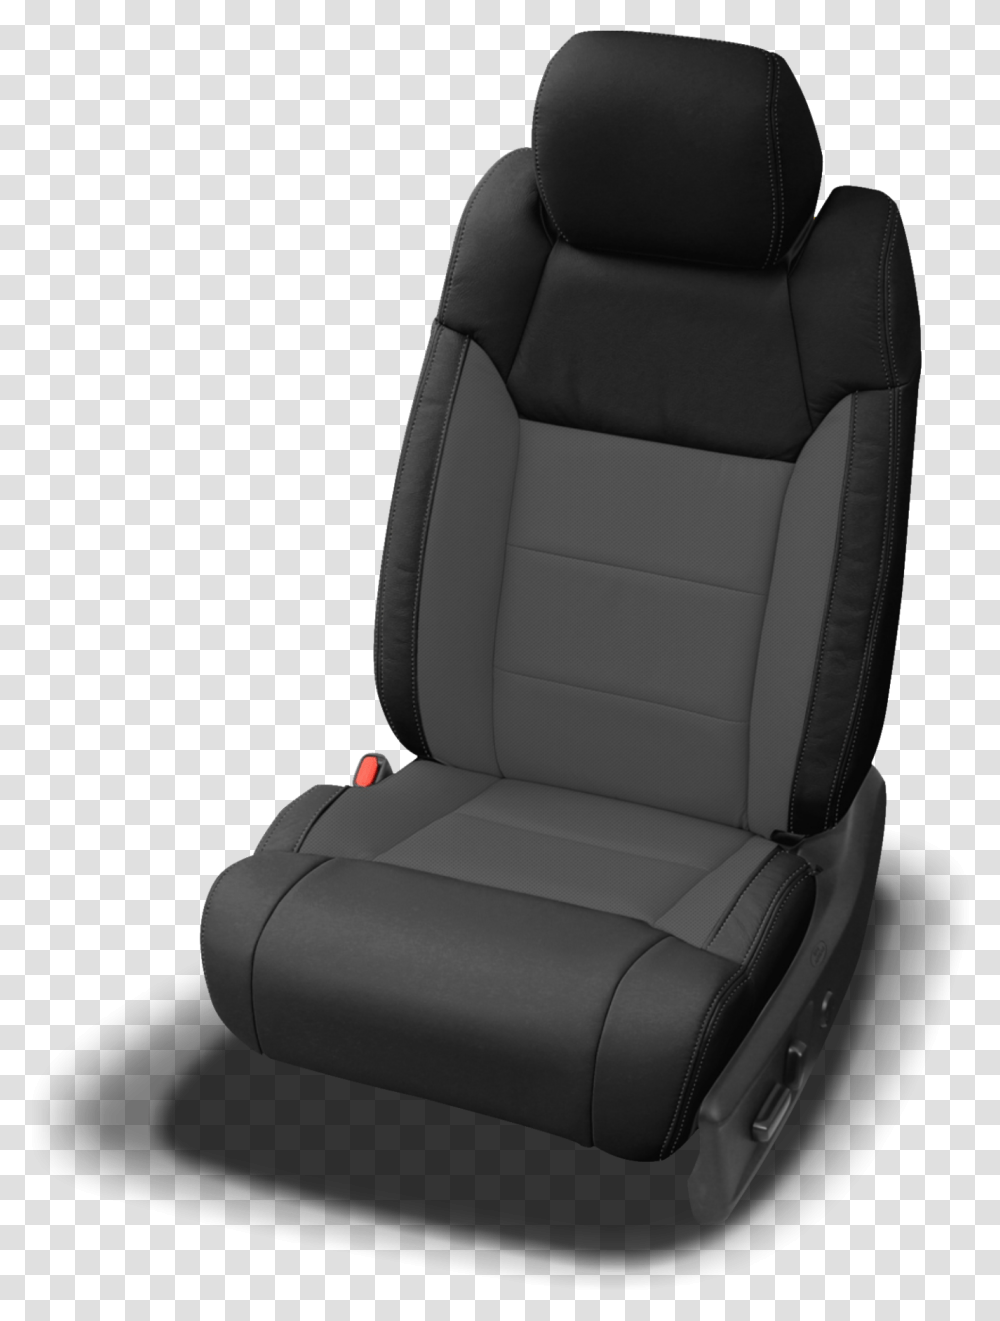 Leather Seat Clipart Car Seat Hd, Chair, Furniture, Cushion, Headrest Transparent Png